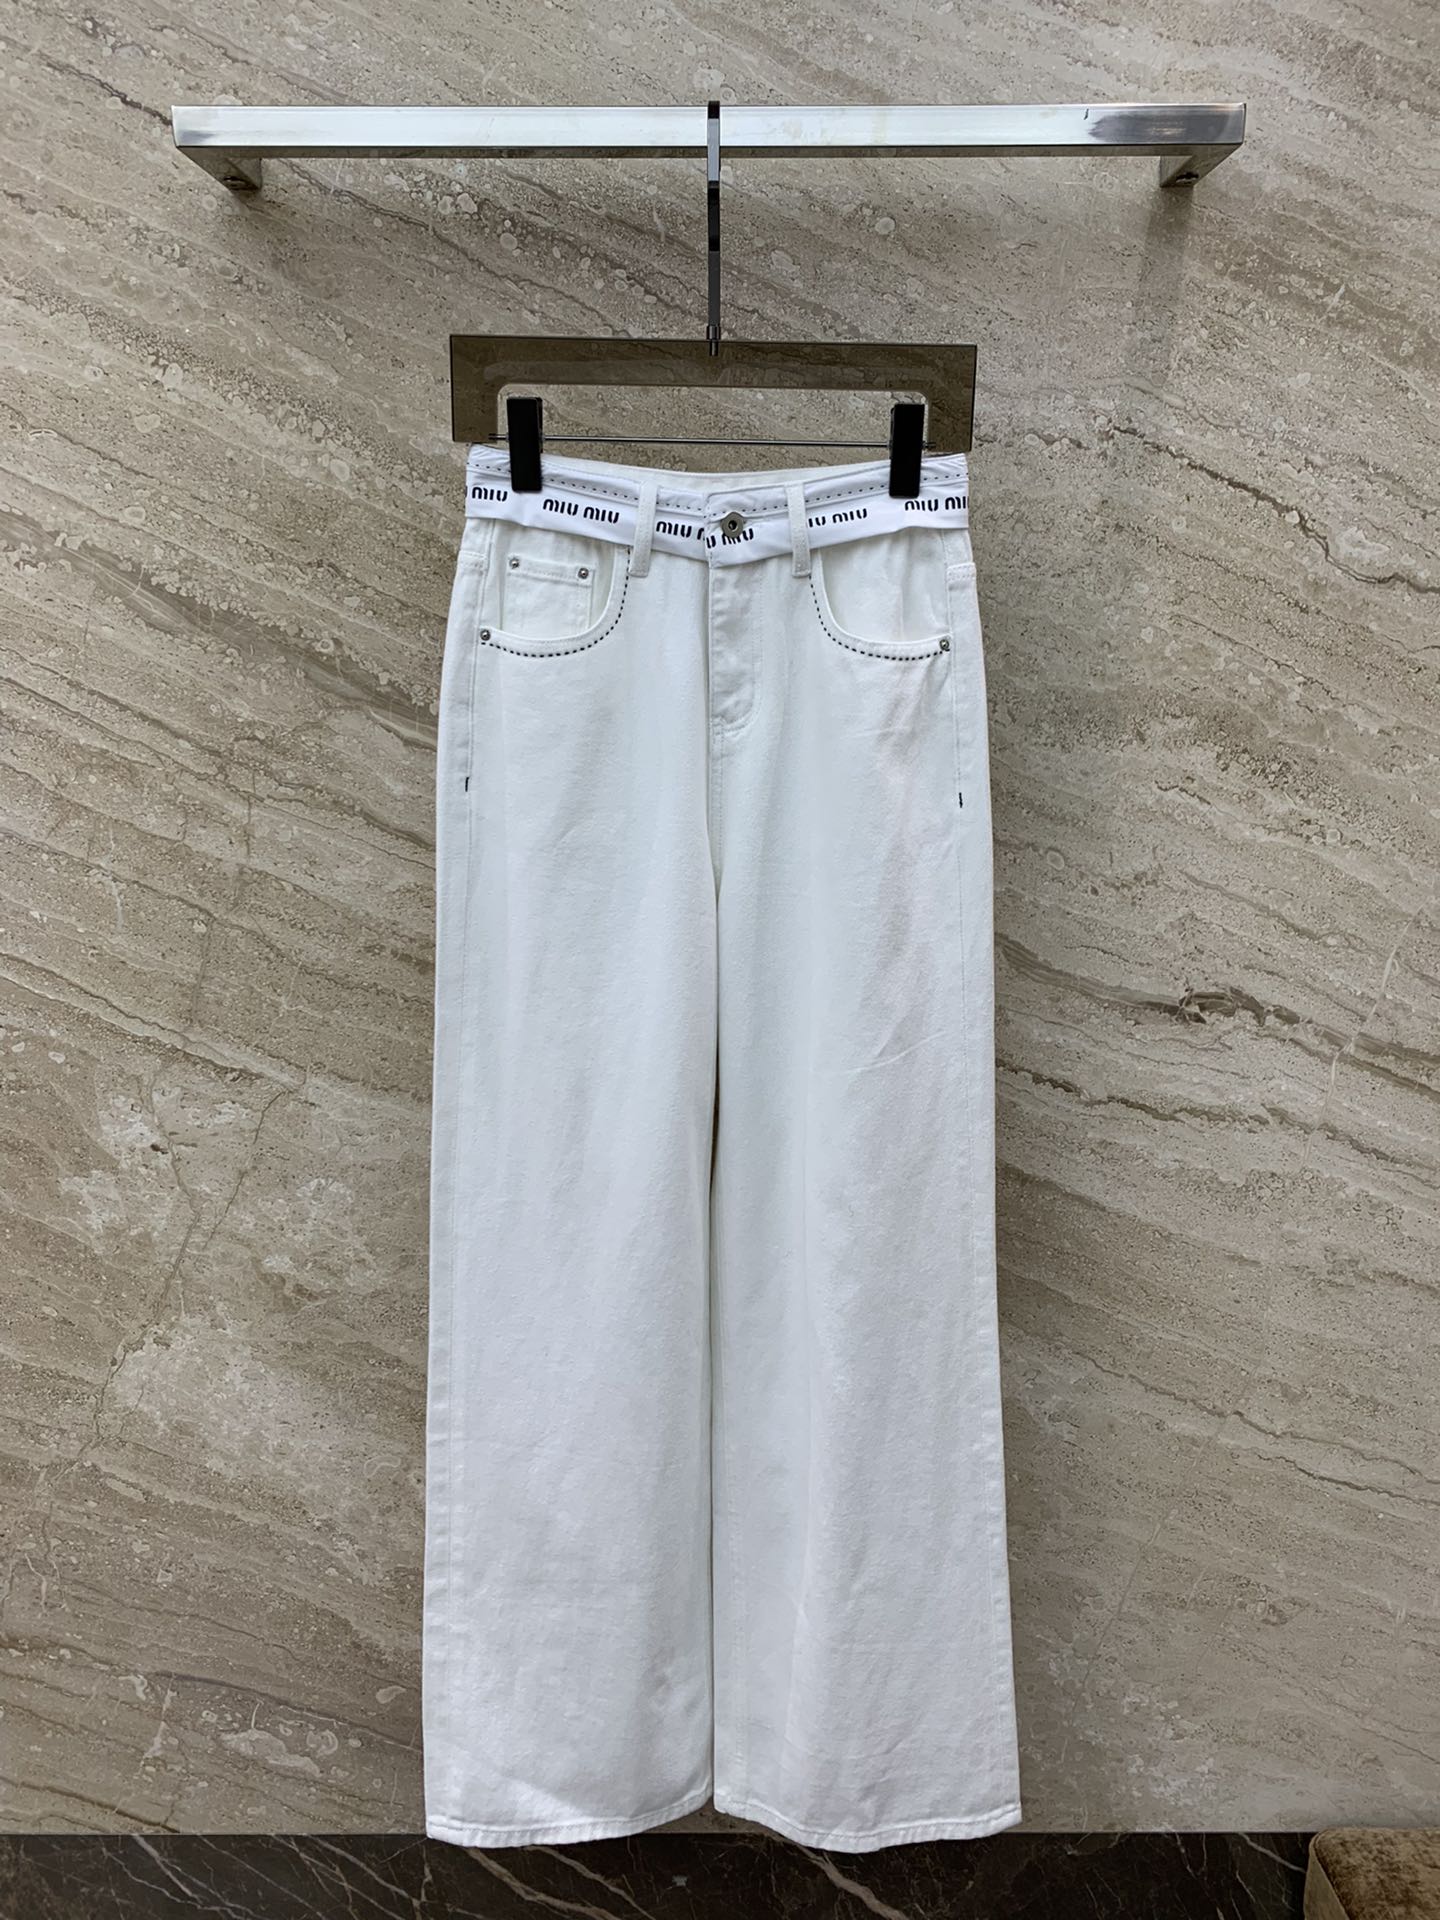 MiuMiu Clothing Jeans White Spring Collection Wide Leg